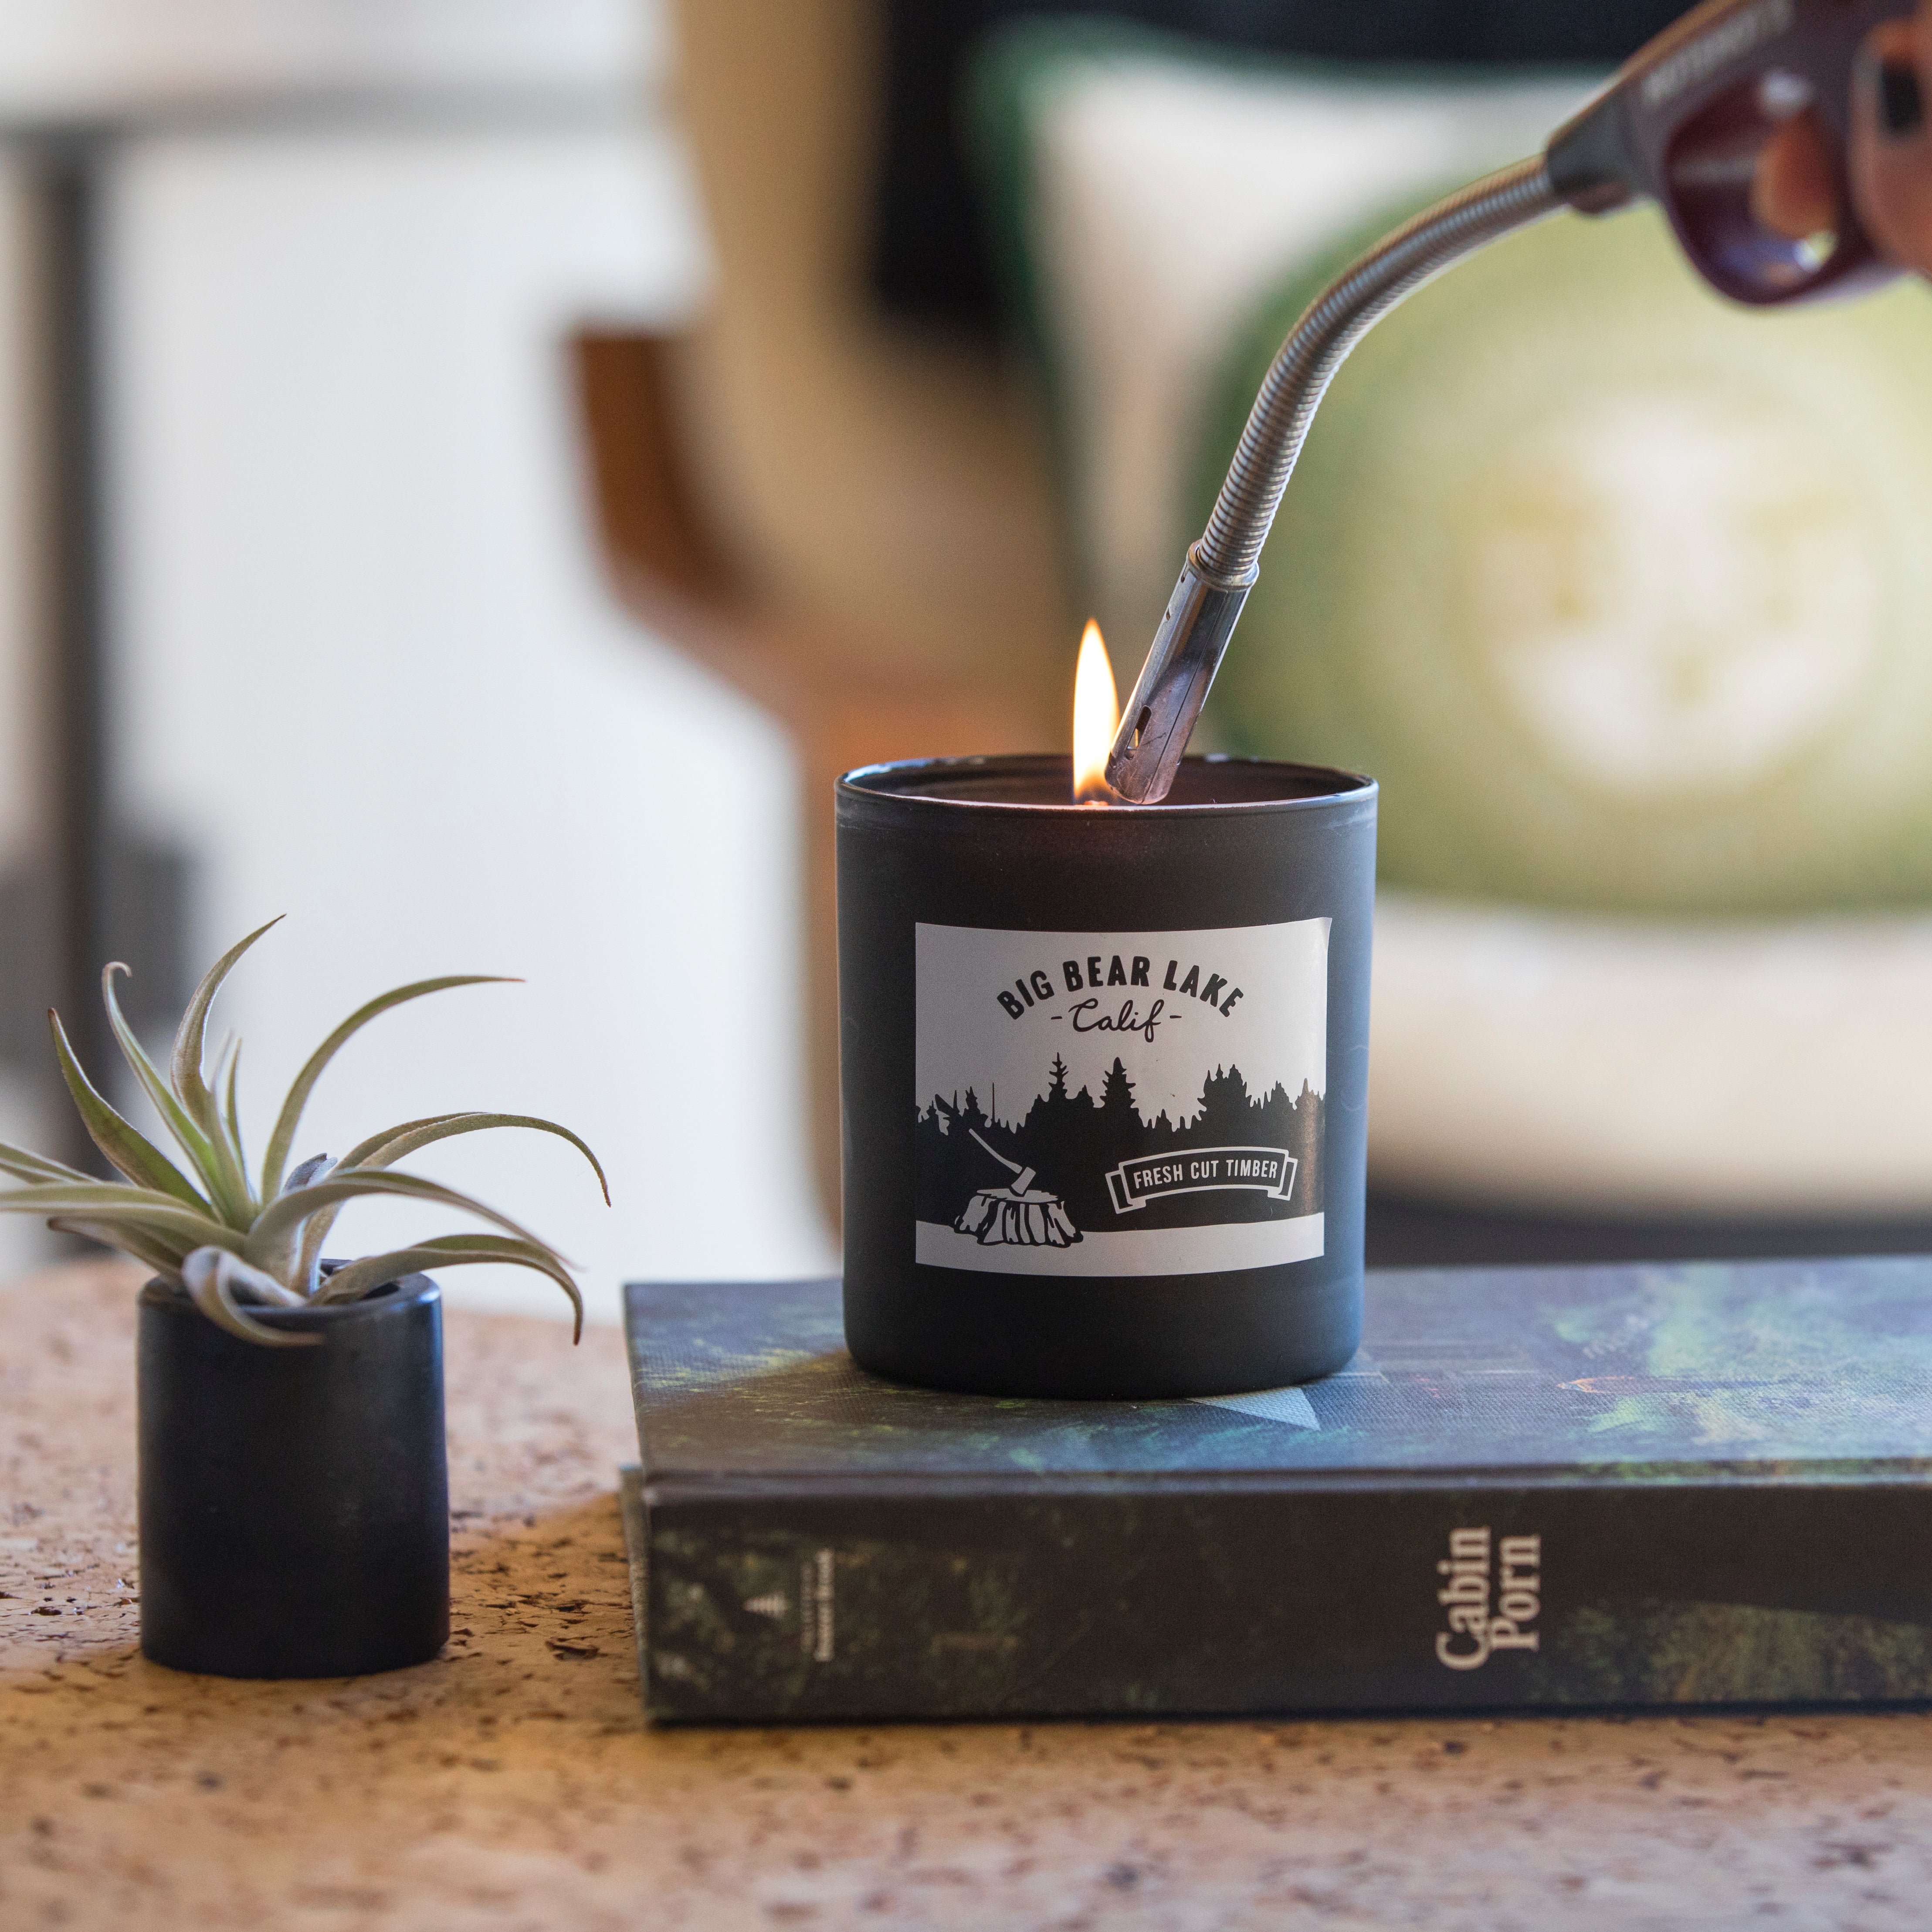 Big Bear Lake Fresh Cut Timber Candle - Custom Logo - Coconut Wax - Paraben Free - Food Grade Certified Coconut Oil - Sustainable Wax - Essential Oil Blends - Women's Clothing Store - Boutique - O KOO RAN - Big Bear Lake California